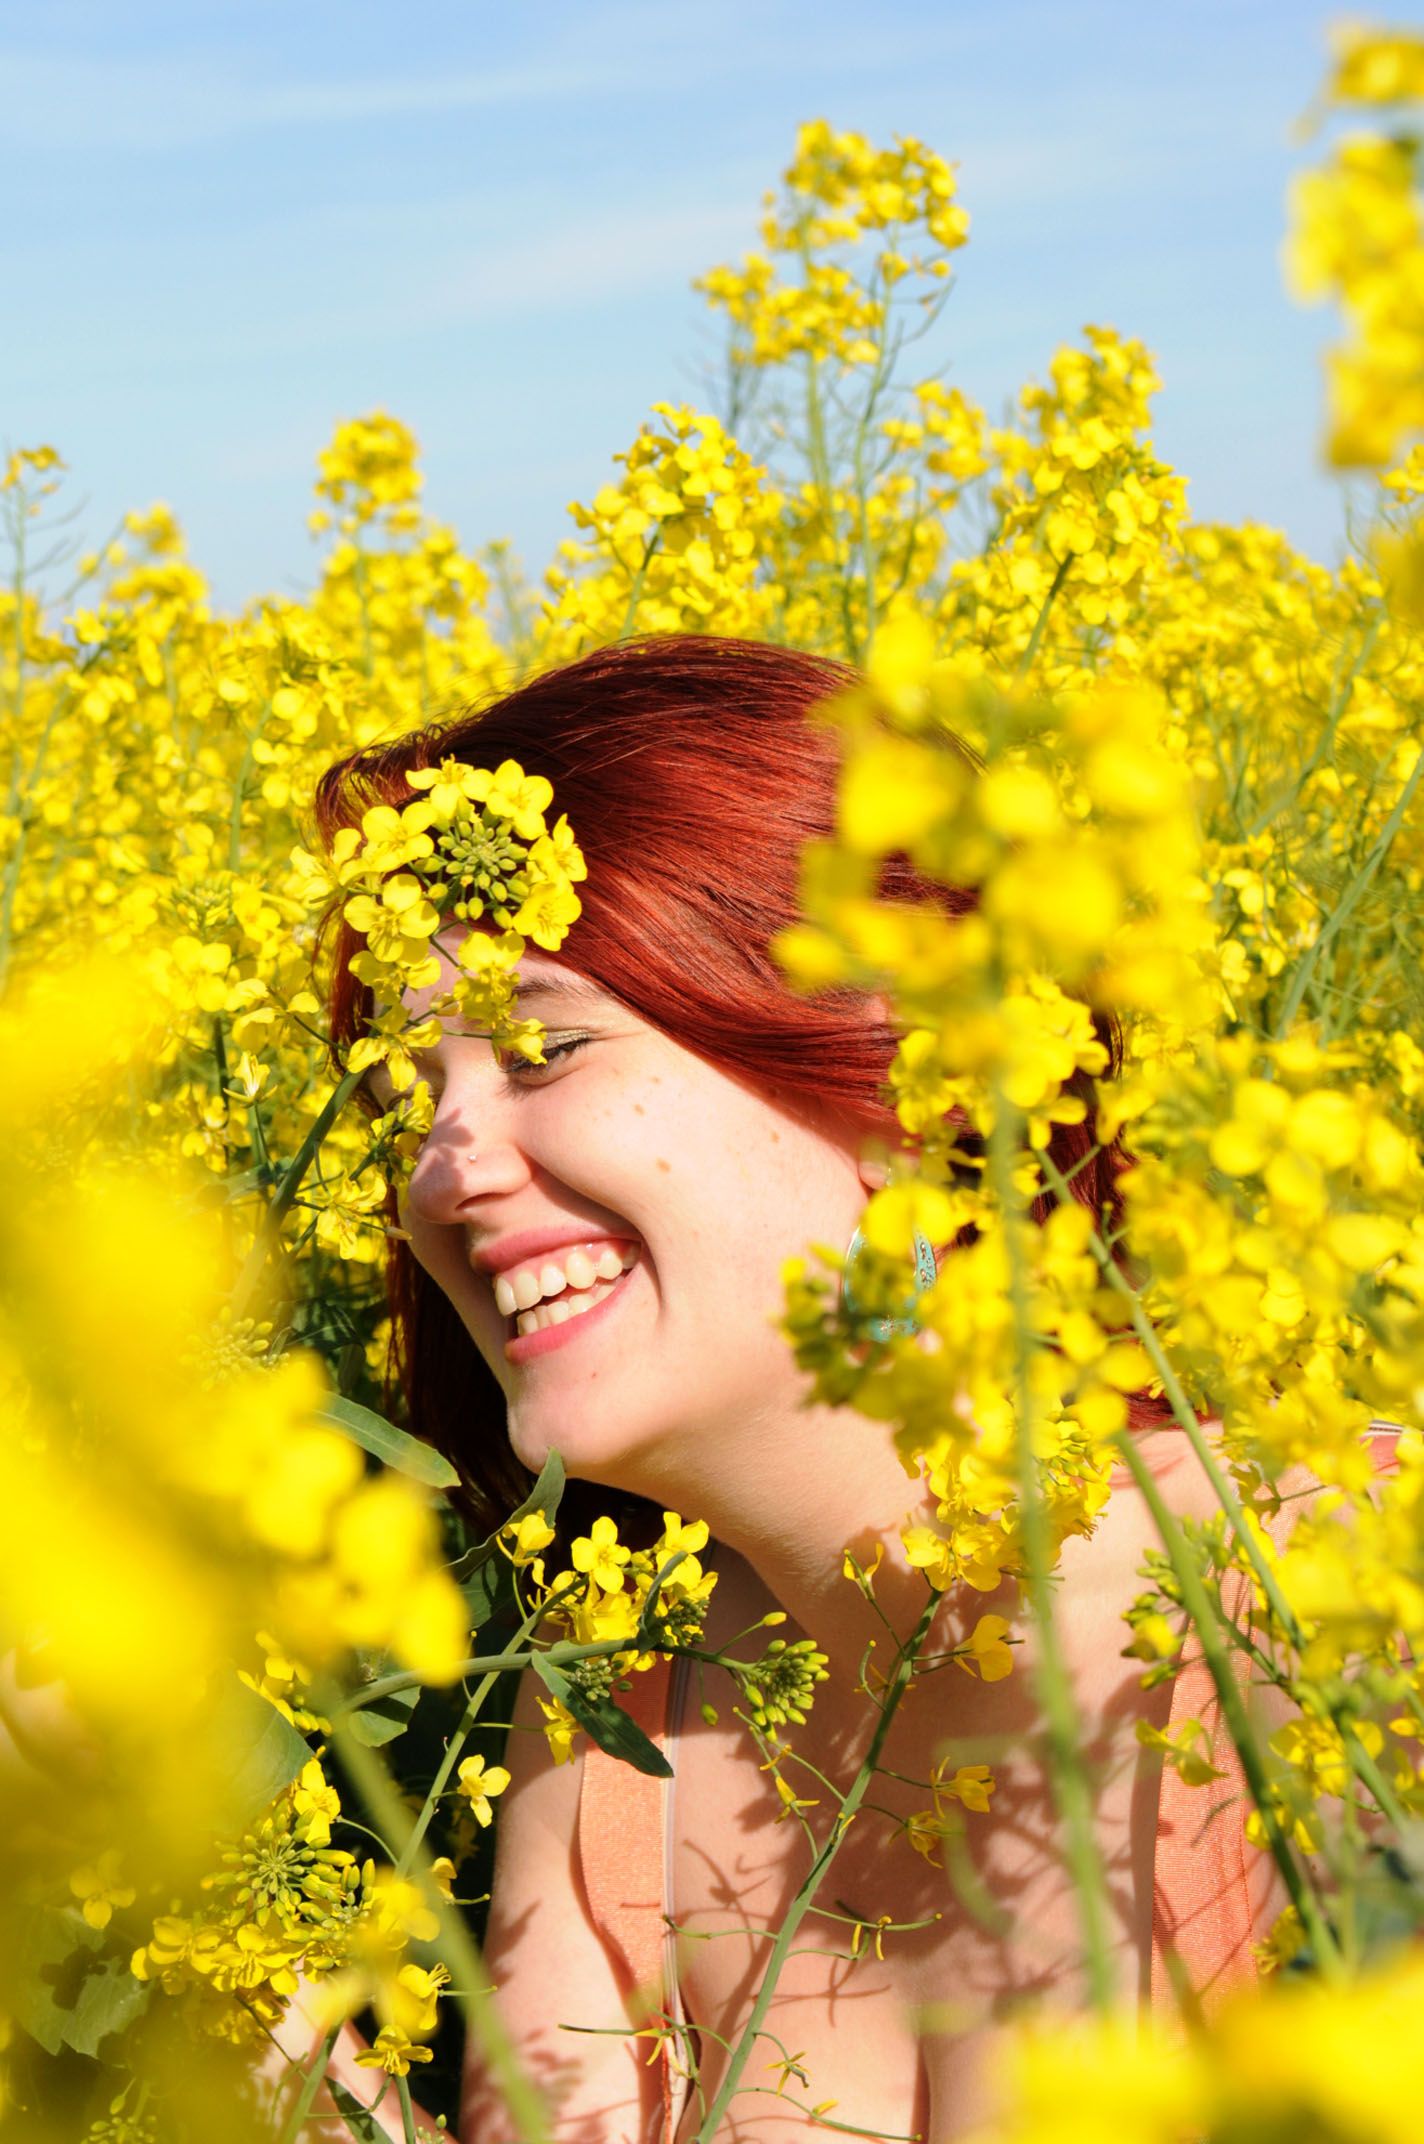 Daisy in the Rapeseed field in Summer | Photographing rapeseed field ...